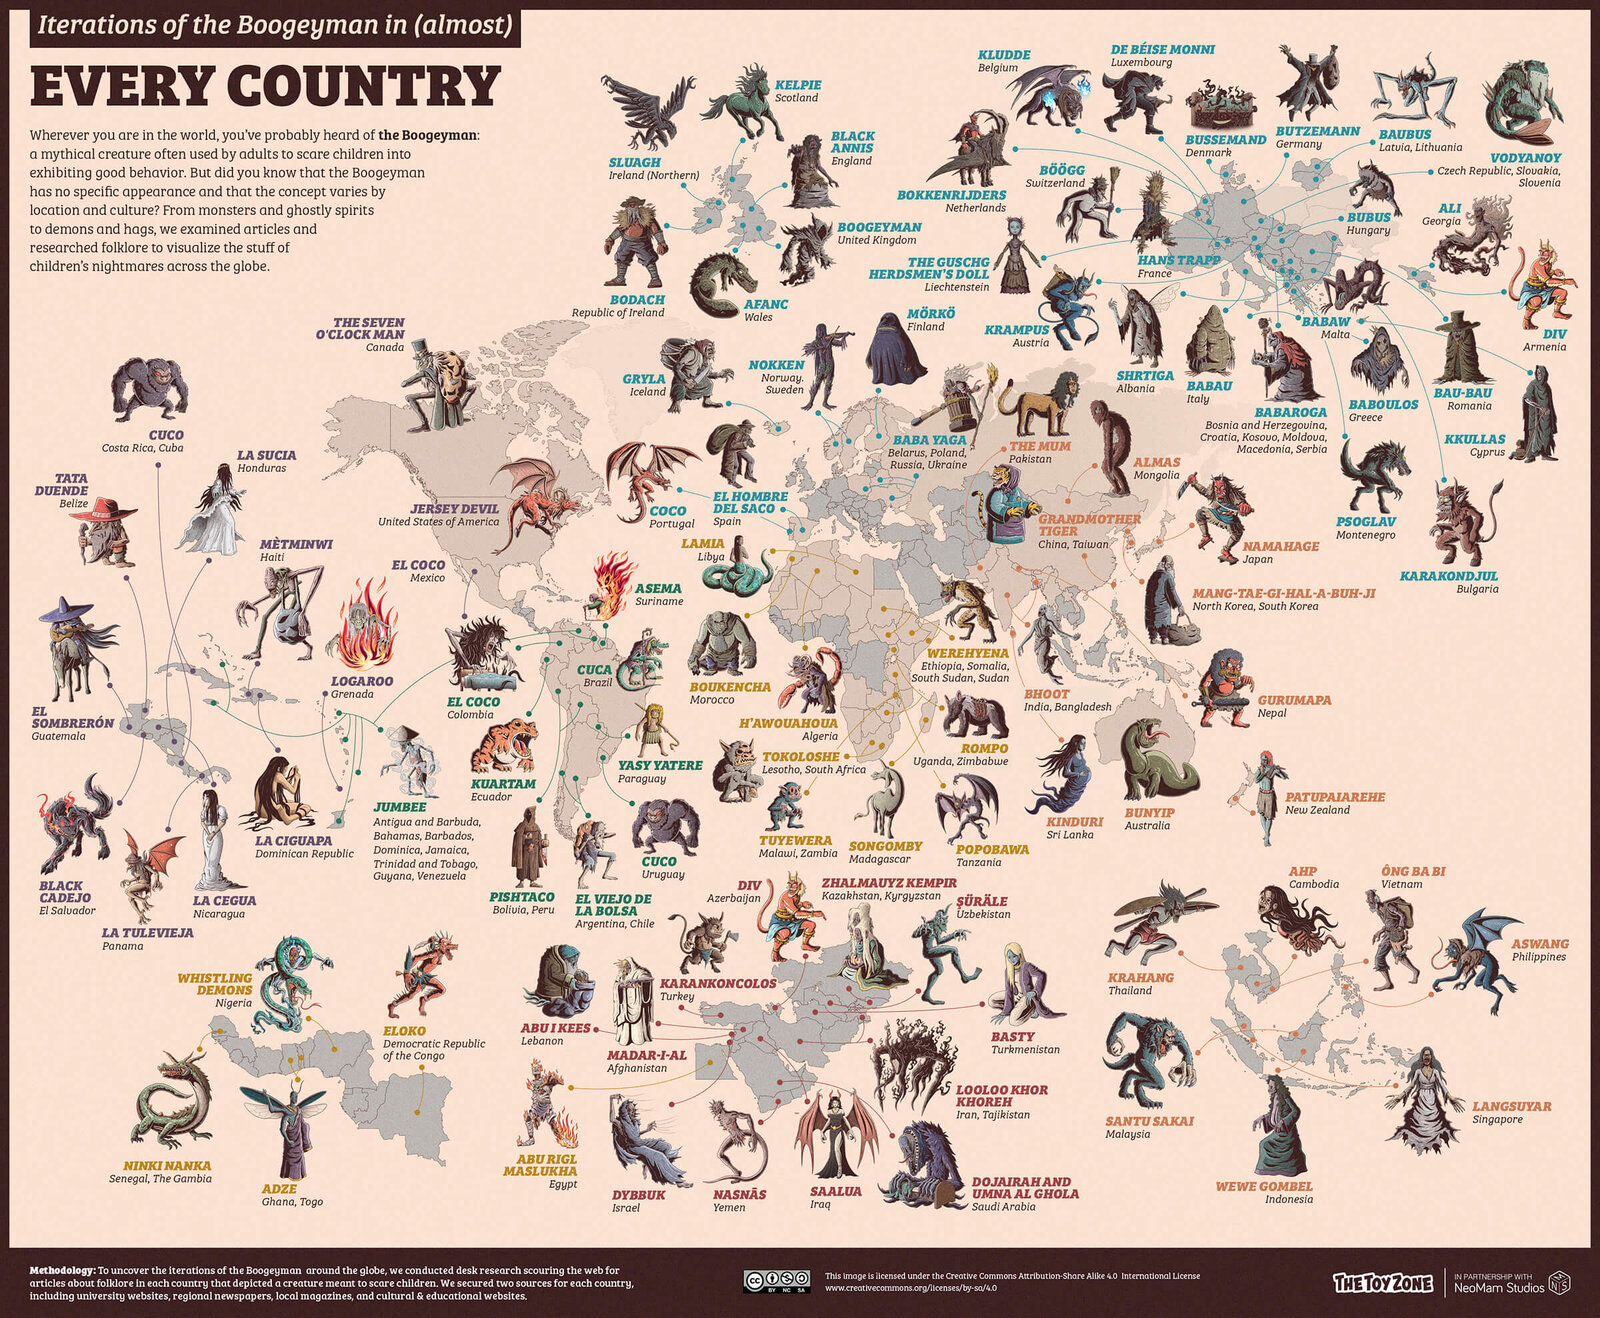 Iterations of the Boogeyman in (Almost) Every Country - Infographic